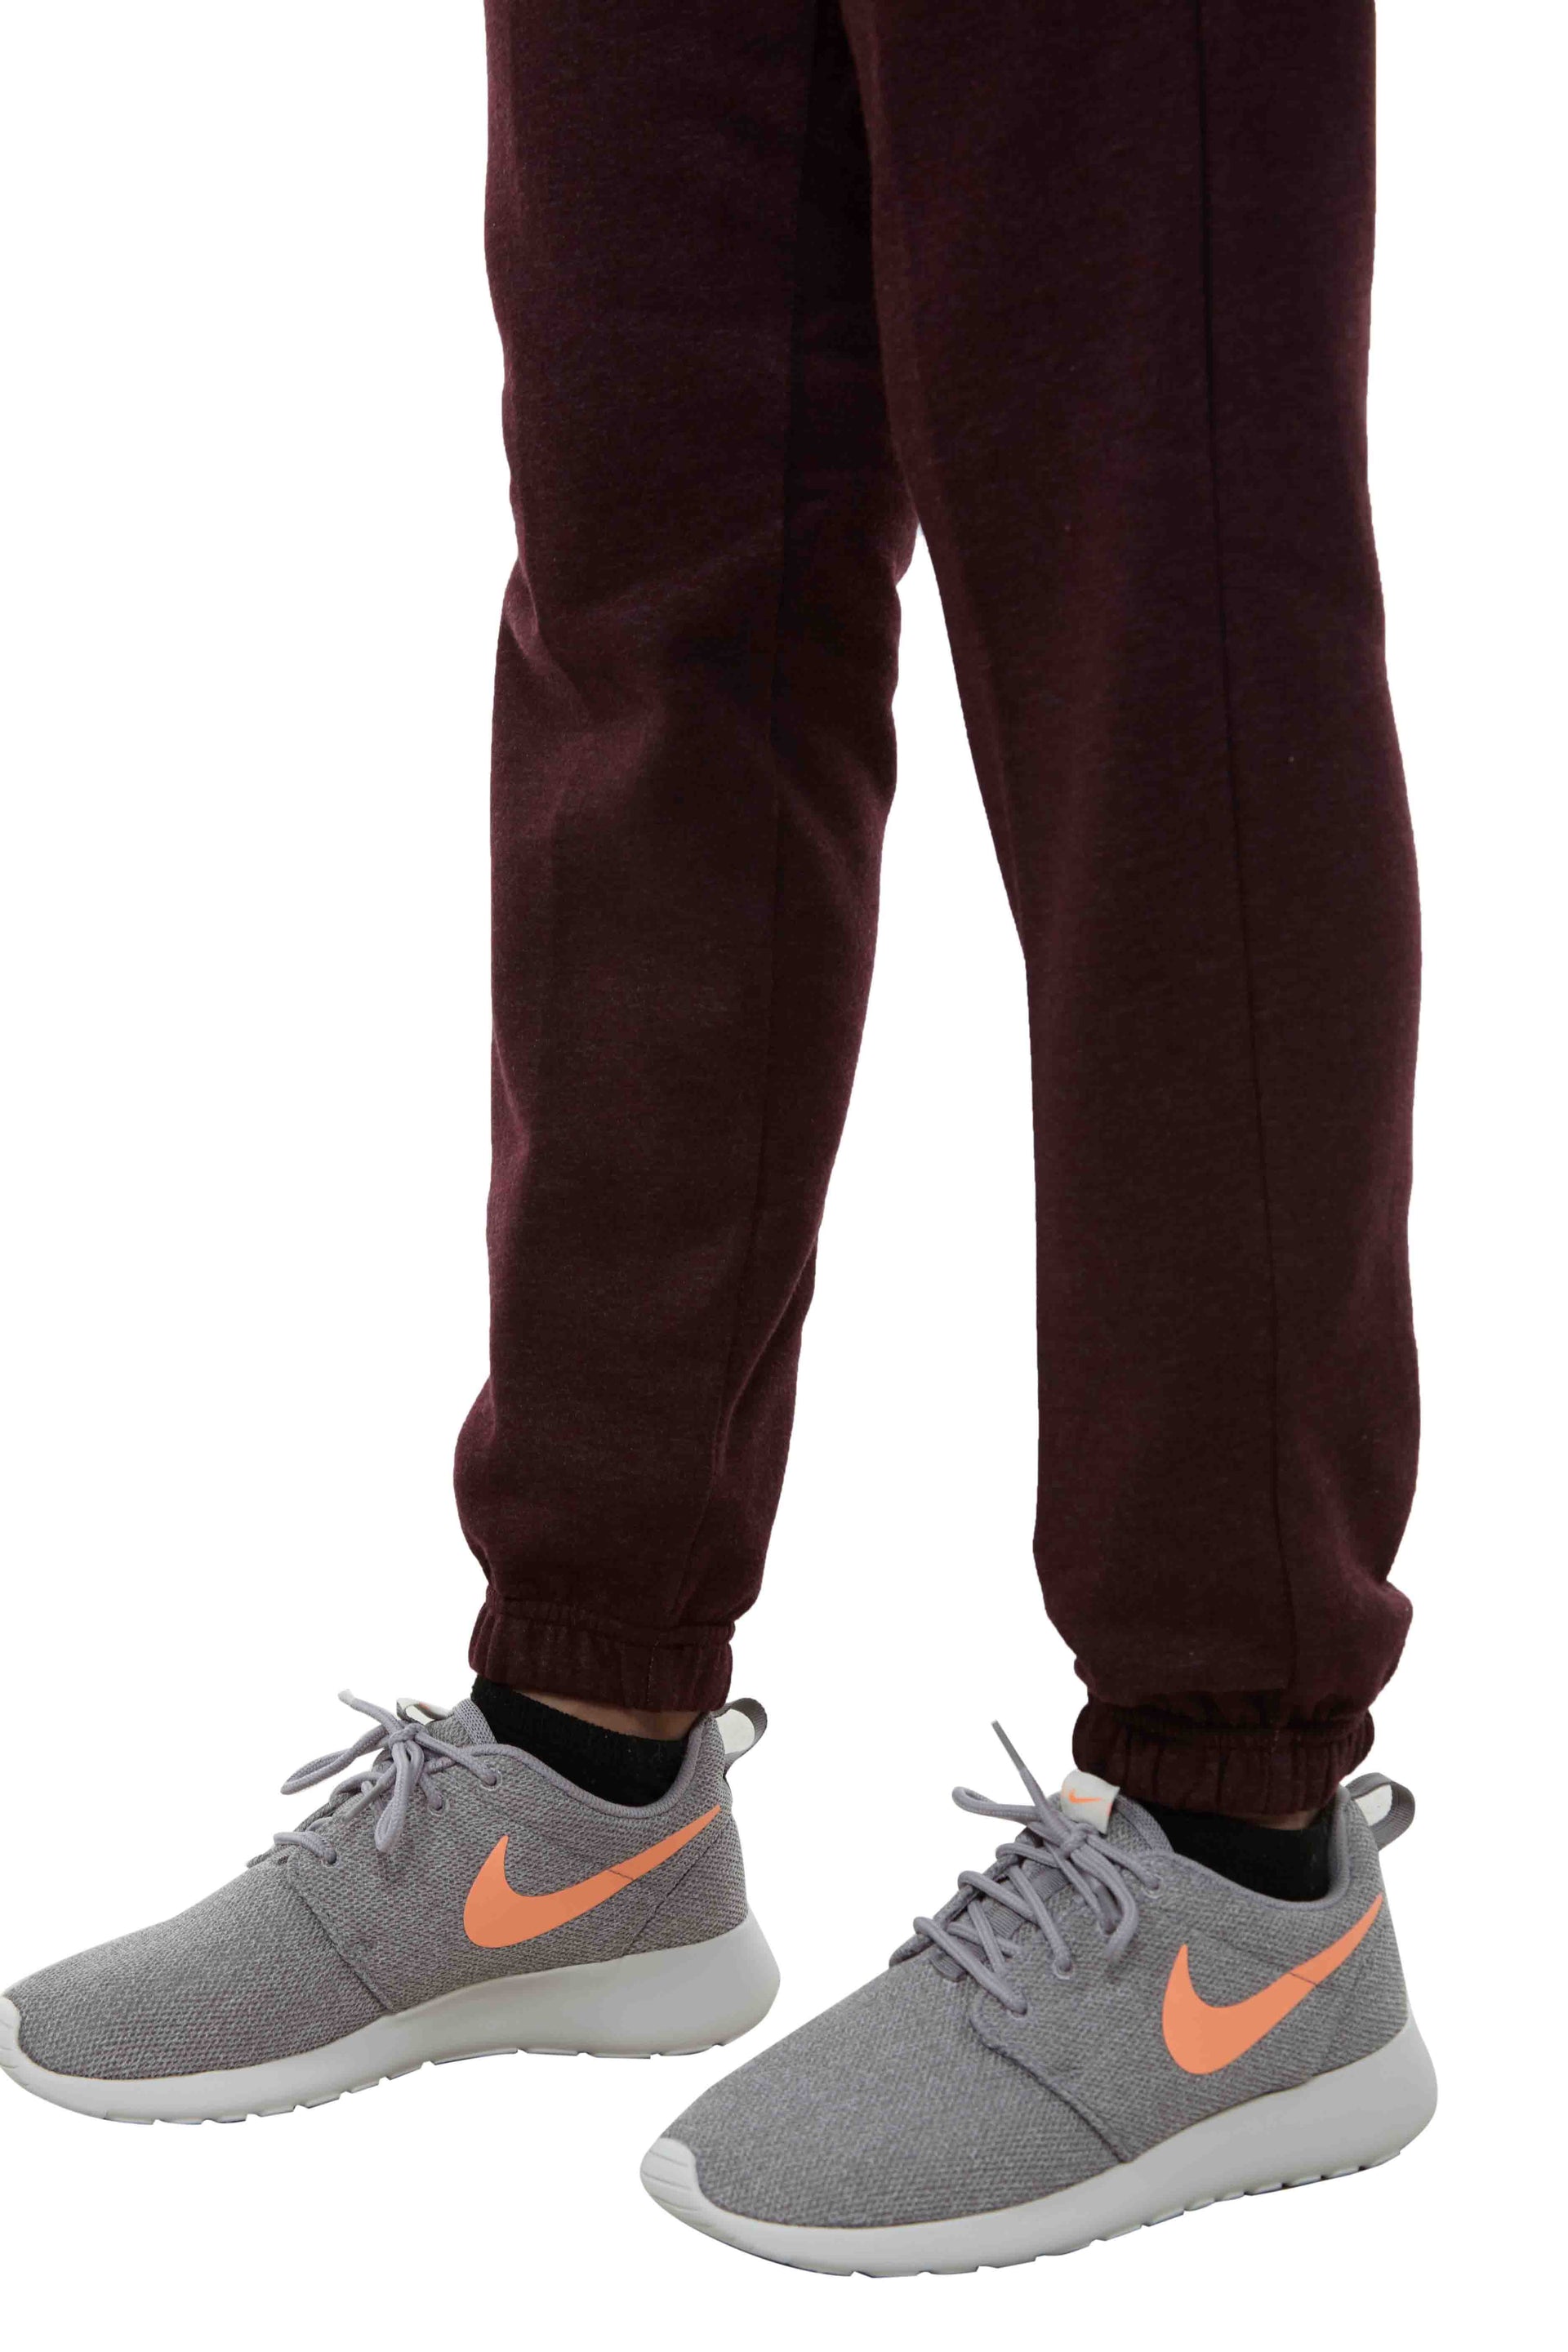 Nike Nsw Jogger Pant Womens Style : 803650-652